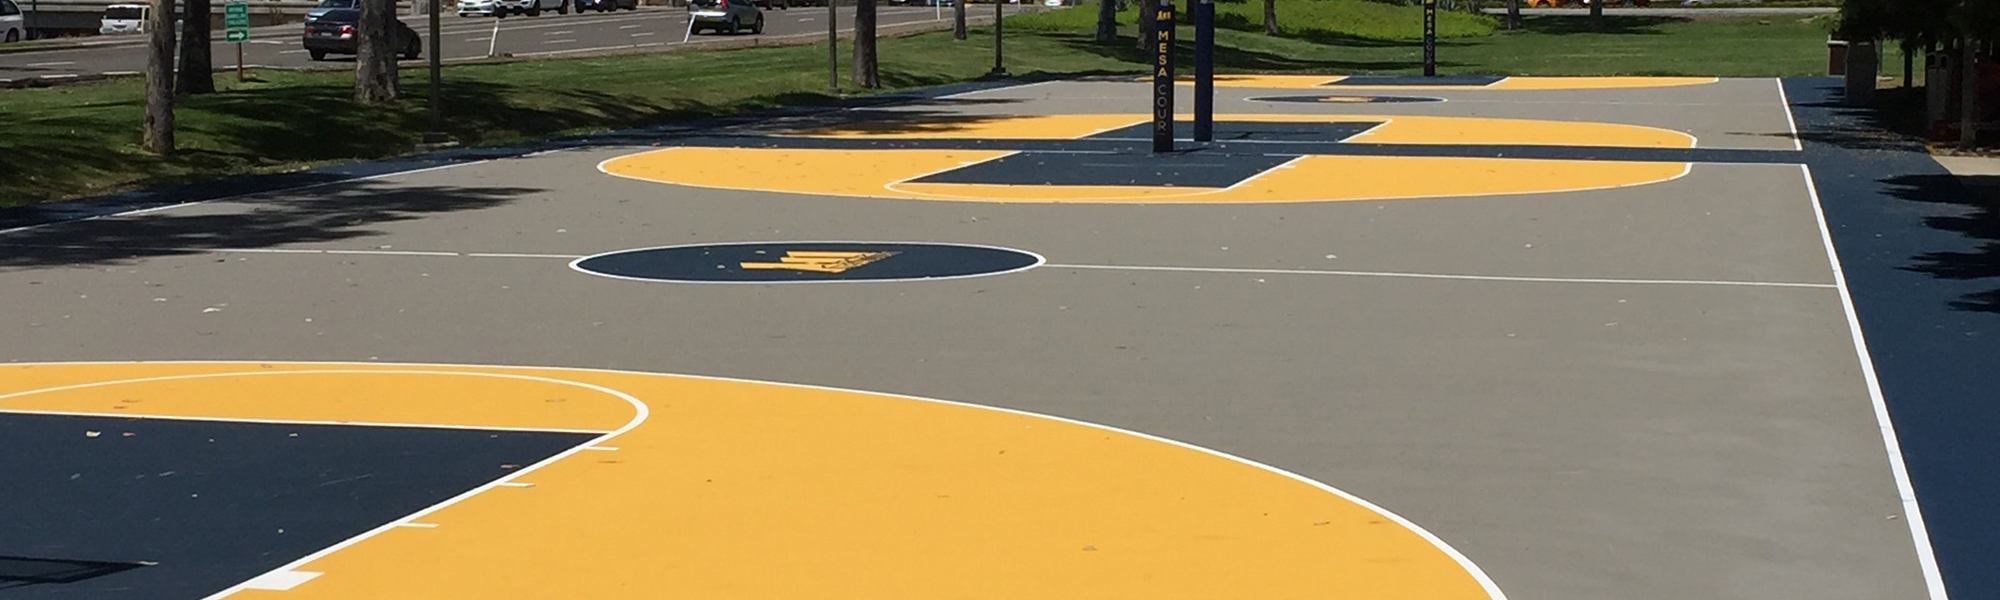 Tennis Court Resurfacing Products and Acrylic Sport Surfaces